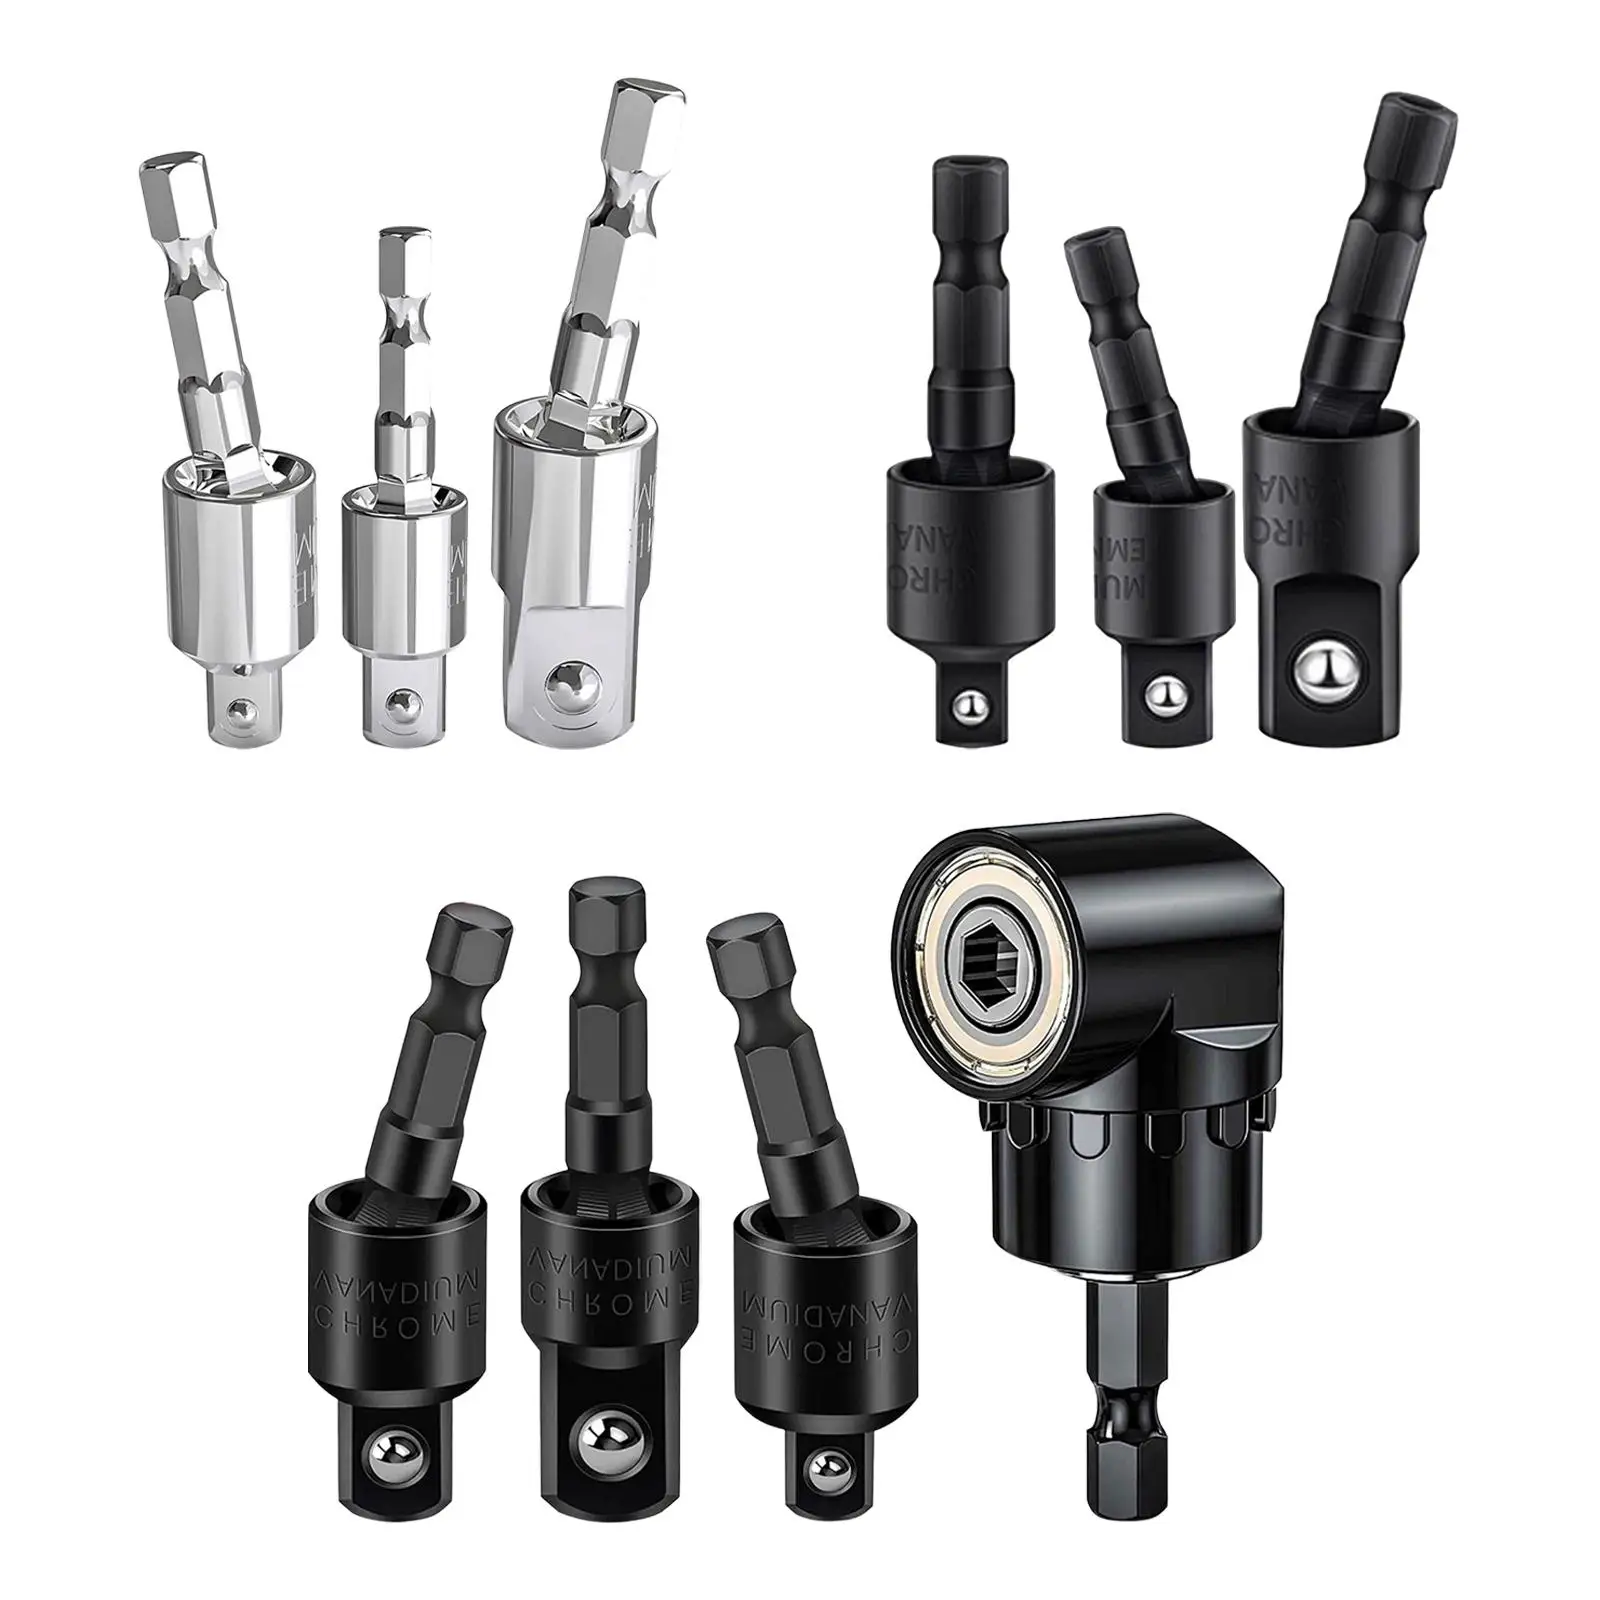 

3Pcs 1/4" 3/8" 1/2"Driver Sockets Adapter Extension 360° Rotatable Universal Joint Swivel Socket, Tools for Vehicle